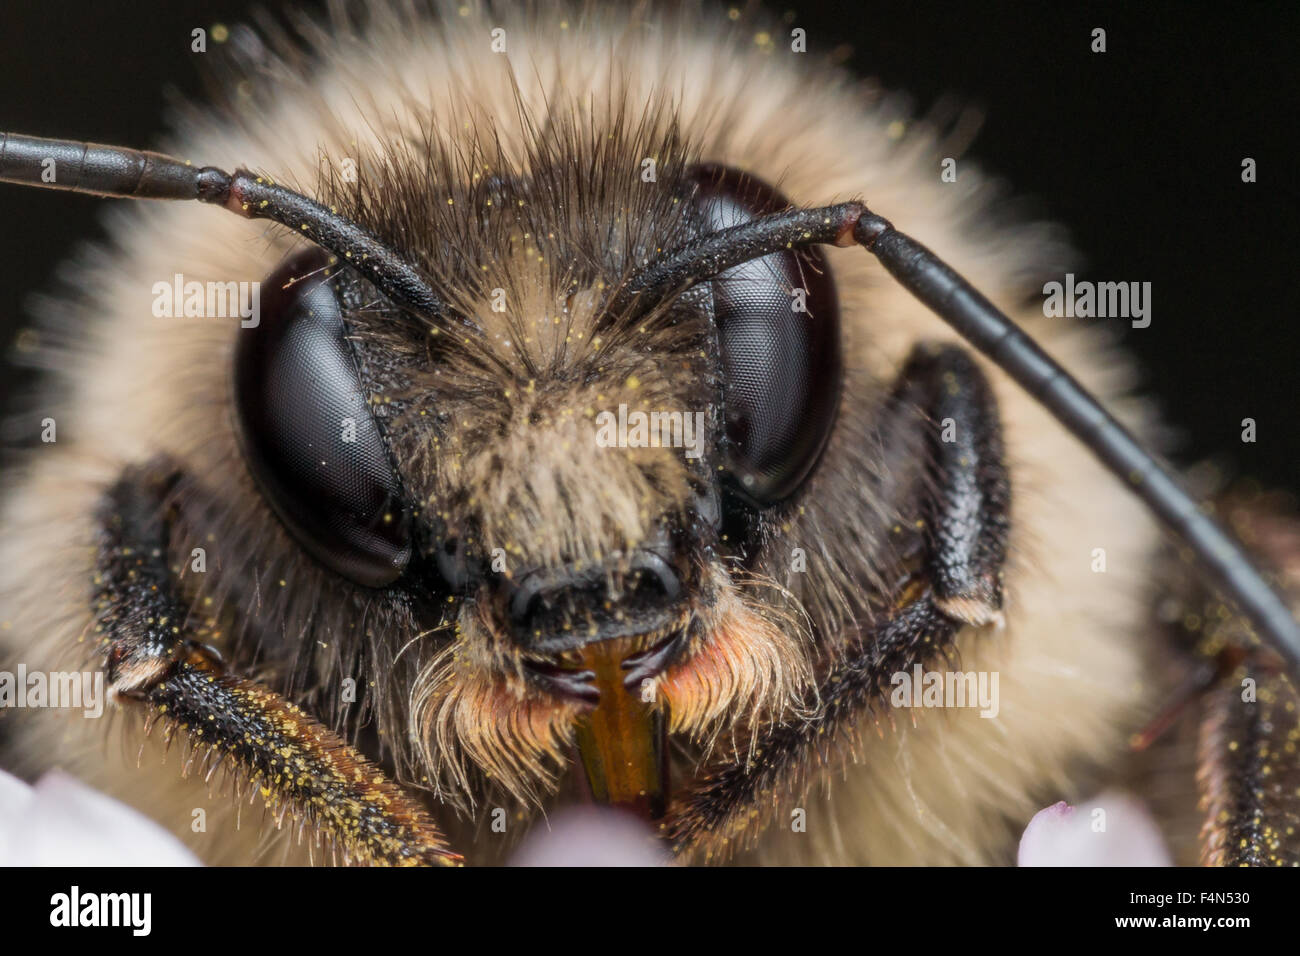 Close up portrait of bumble bee with hairy face on purple flower Stock Photo